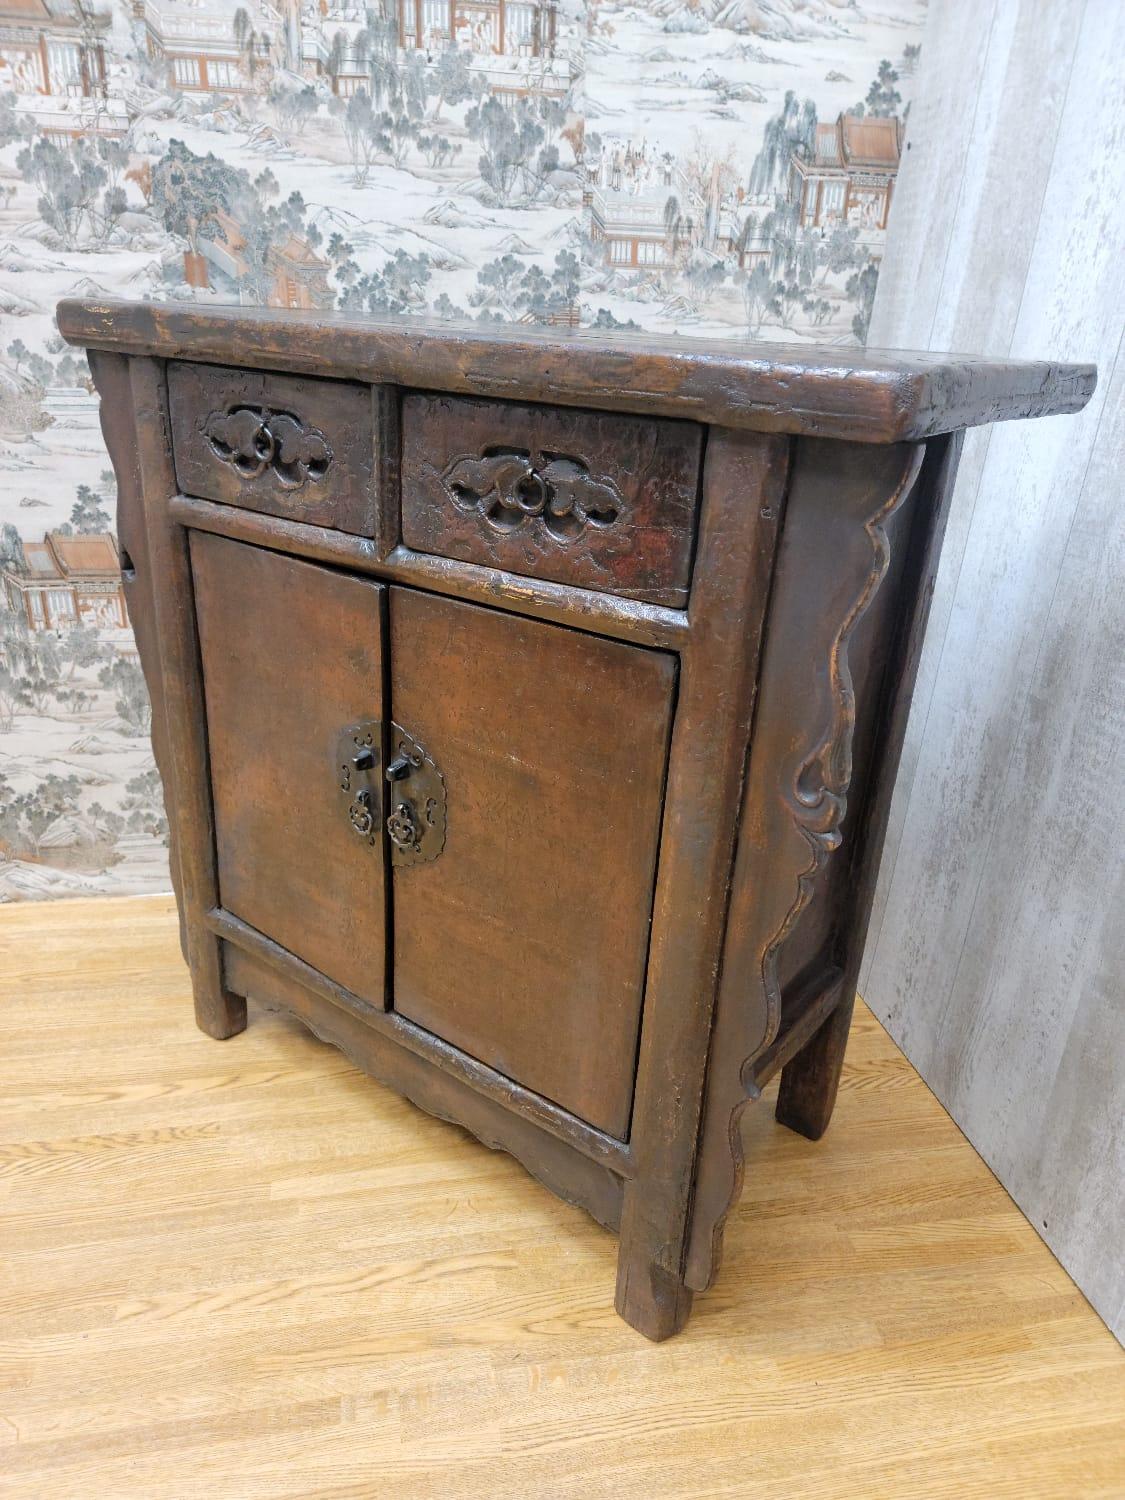 Antique Shanxi Province Small Winged Elmwood Cabinet

This cabinet has 2 drawers and 2 shelves.

Circa: 1880 

Dimensions:

W: 35